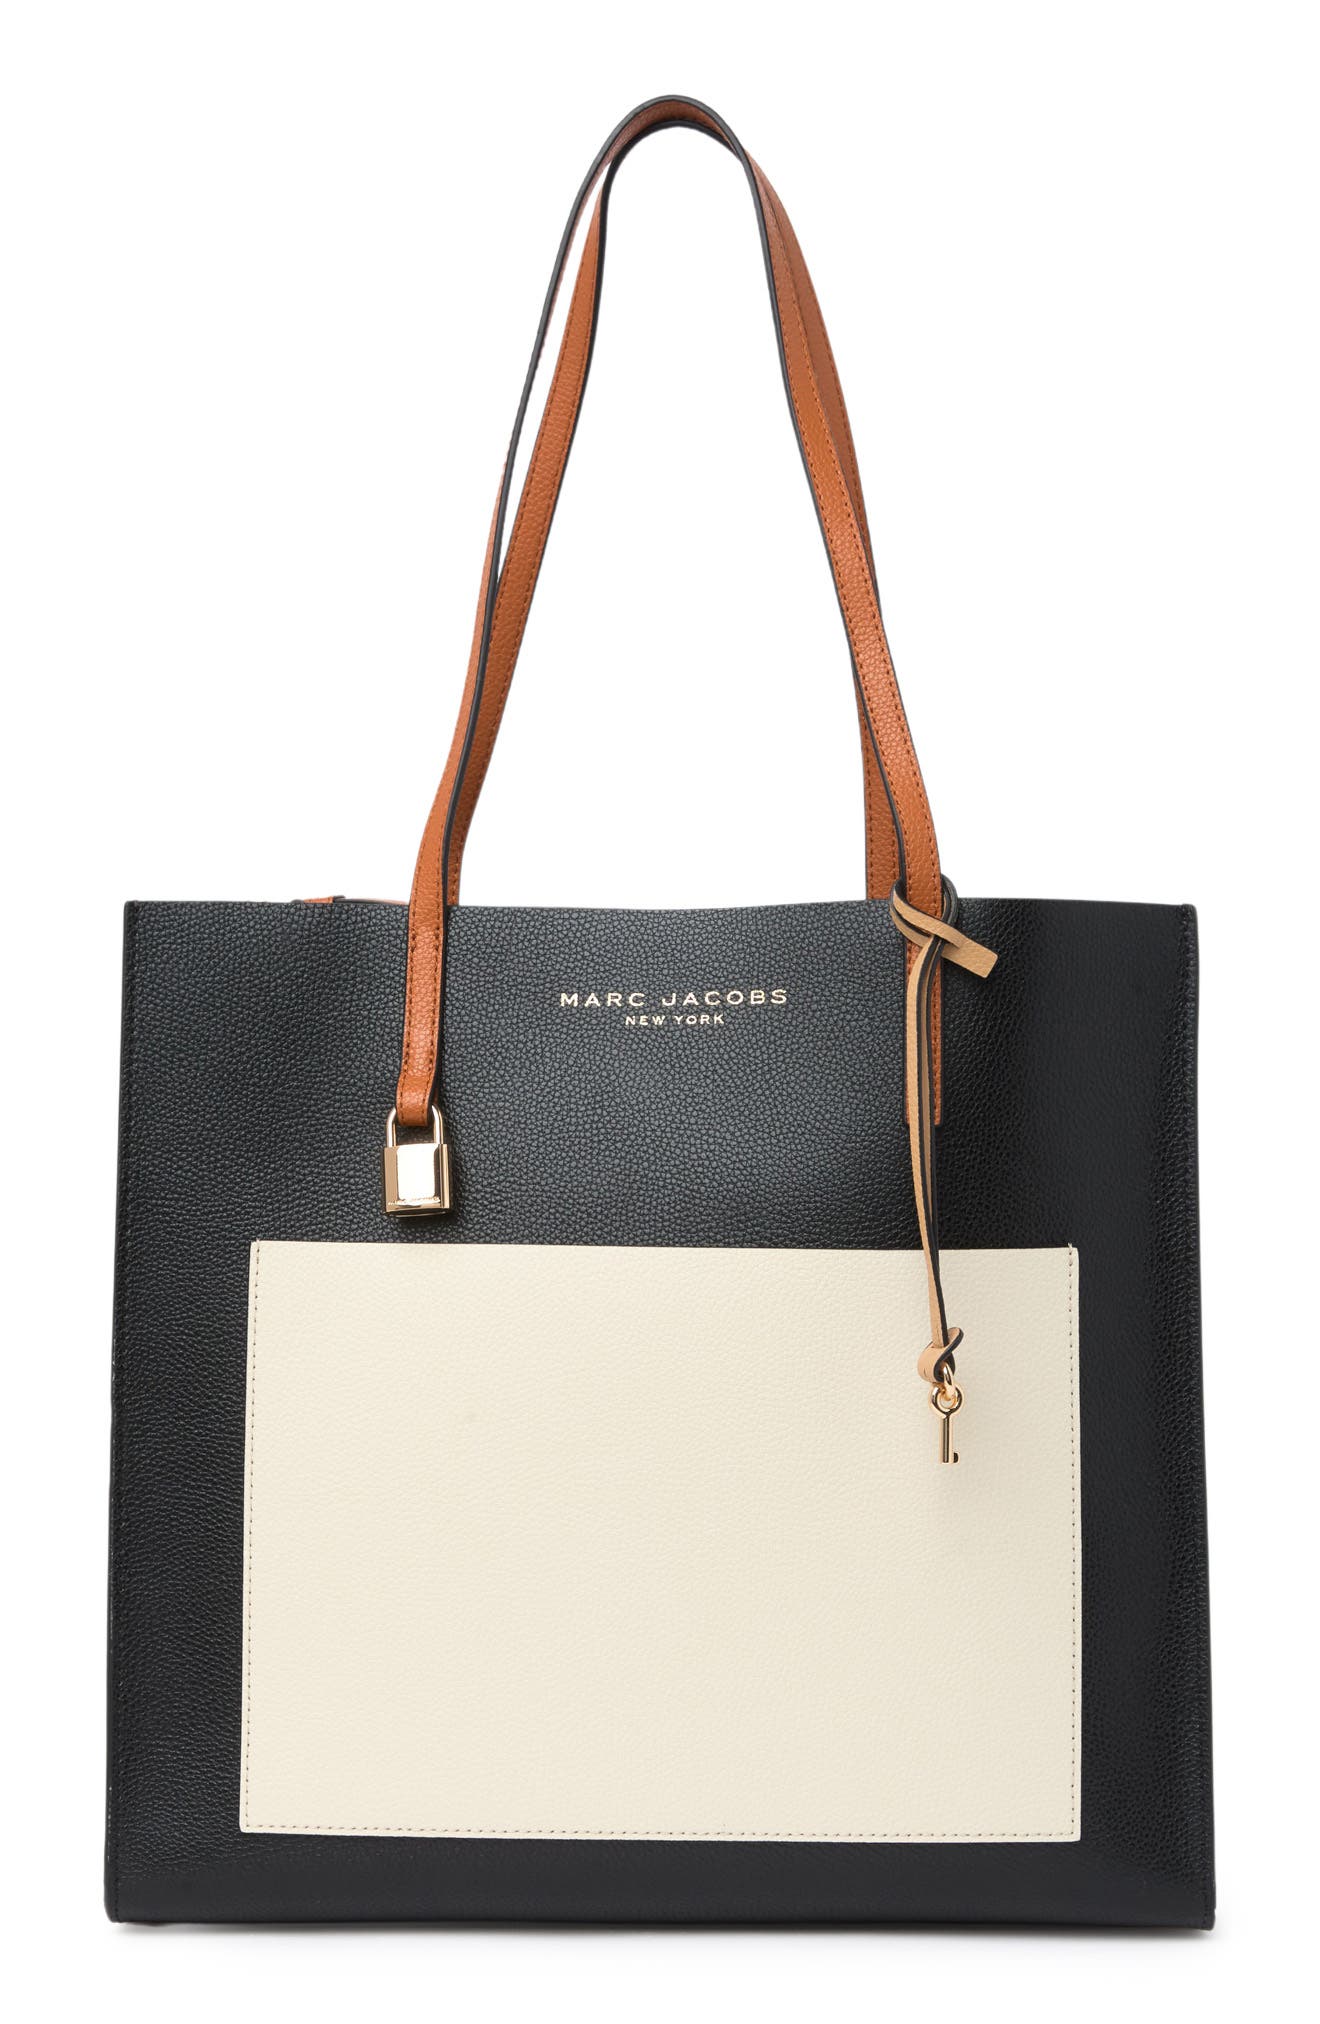 Marc Jacobs Grind Colorblock Leather Tote Bag In Sandshell Multi 